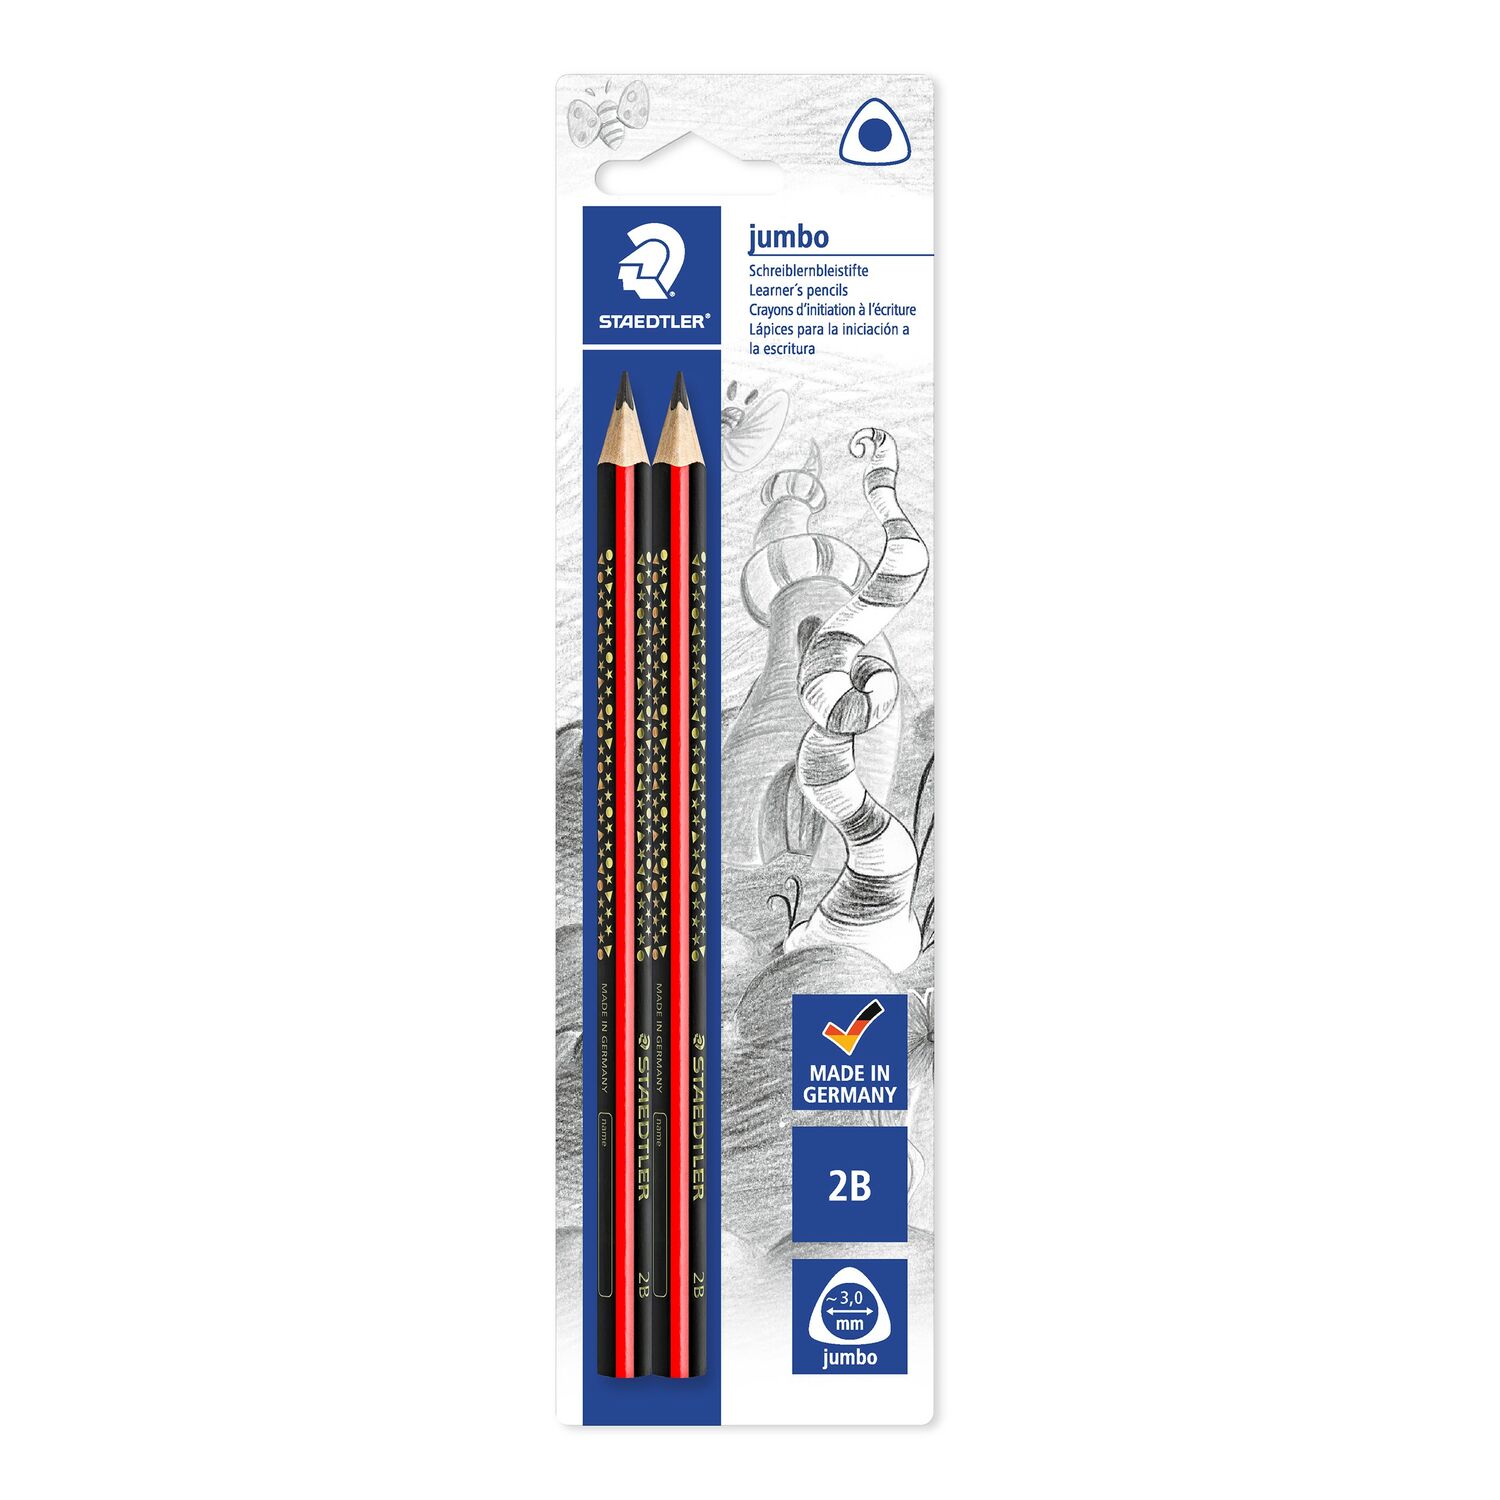 3-15Pcs STAEDTLER 1285 Jumbo Learner's Pencil Triangular Shaped 2B Germany are 